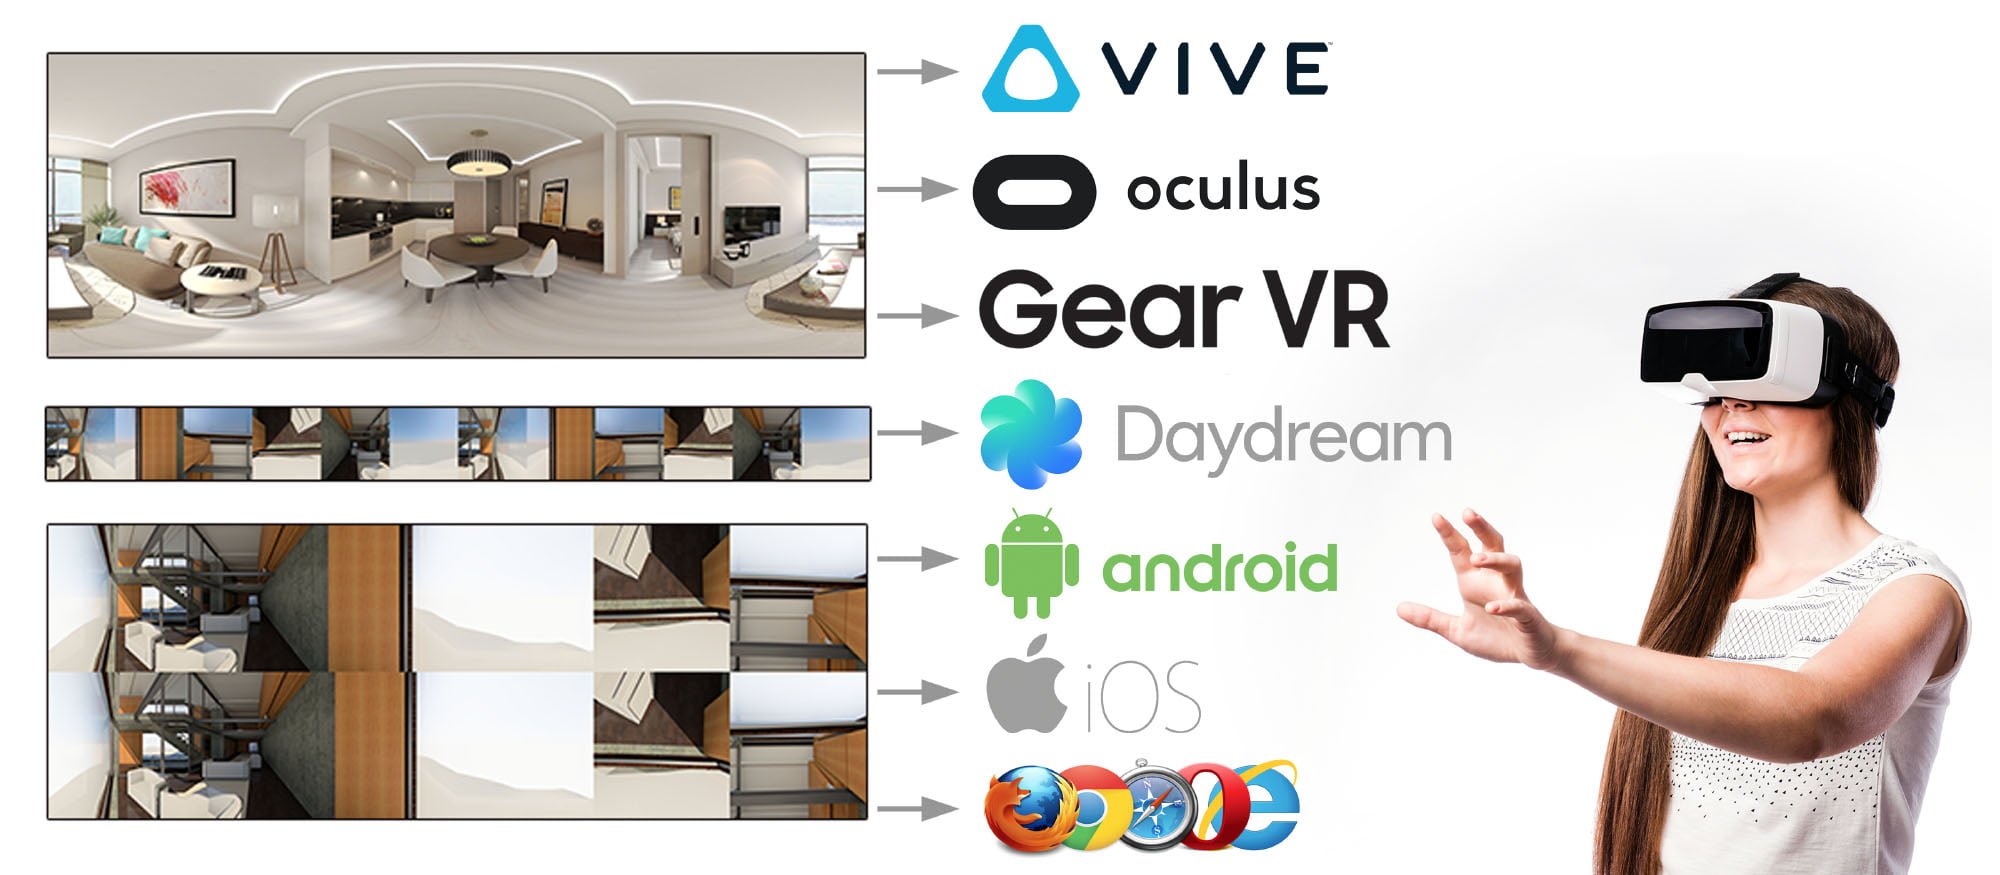 Google claims the rolling out this app for those who are new to 3D modeling with an intention of enabling them to create things in VR with much ease.